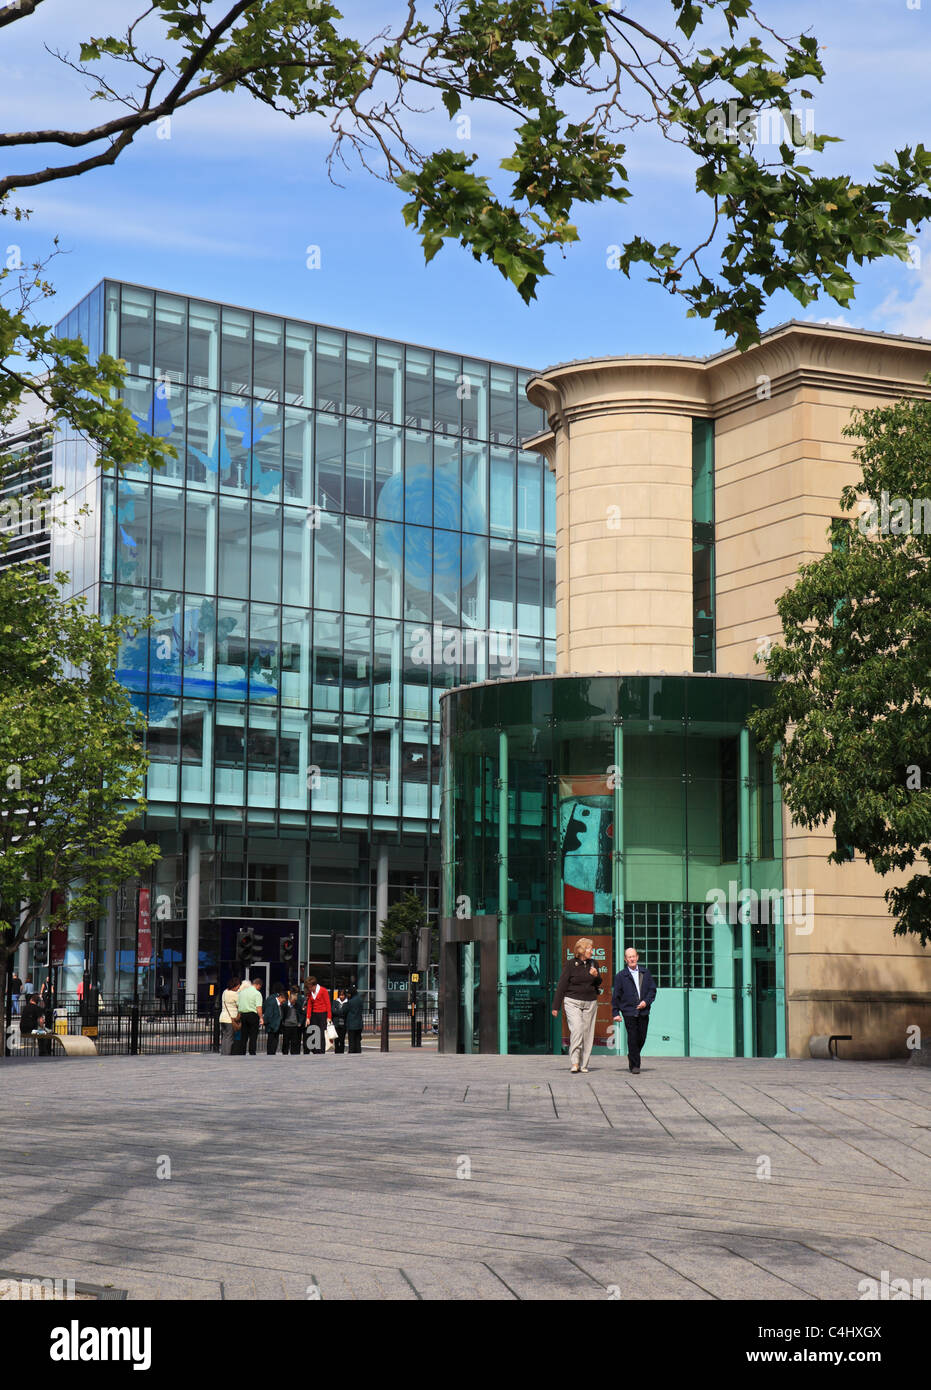 Entrance to the Laing art gallery with the public library in the background, Newcastle upon Tyne, England UK Stock Photo